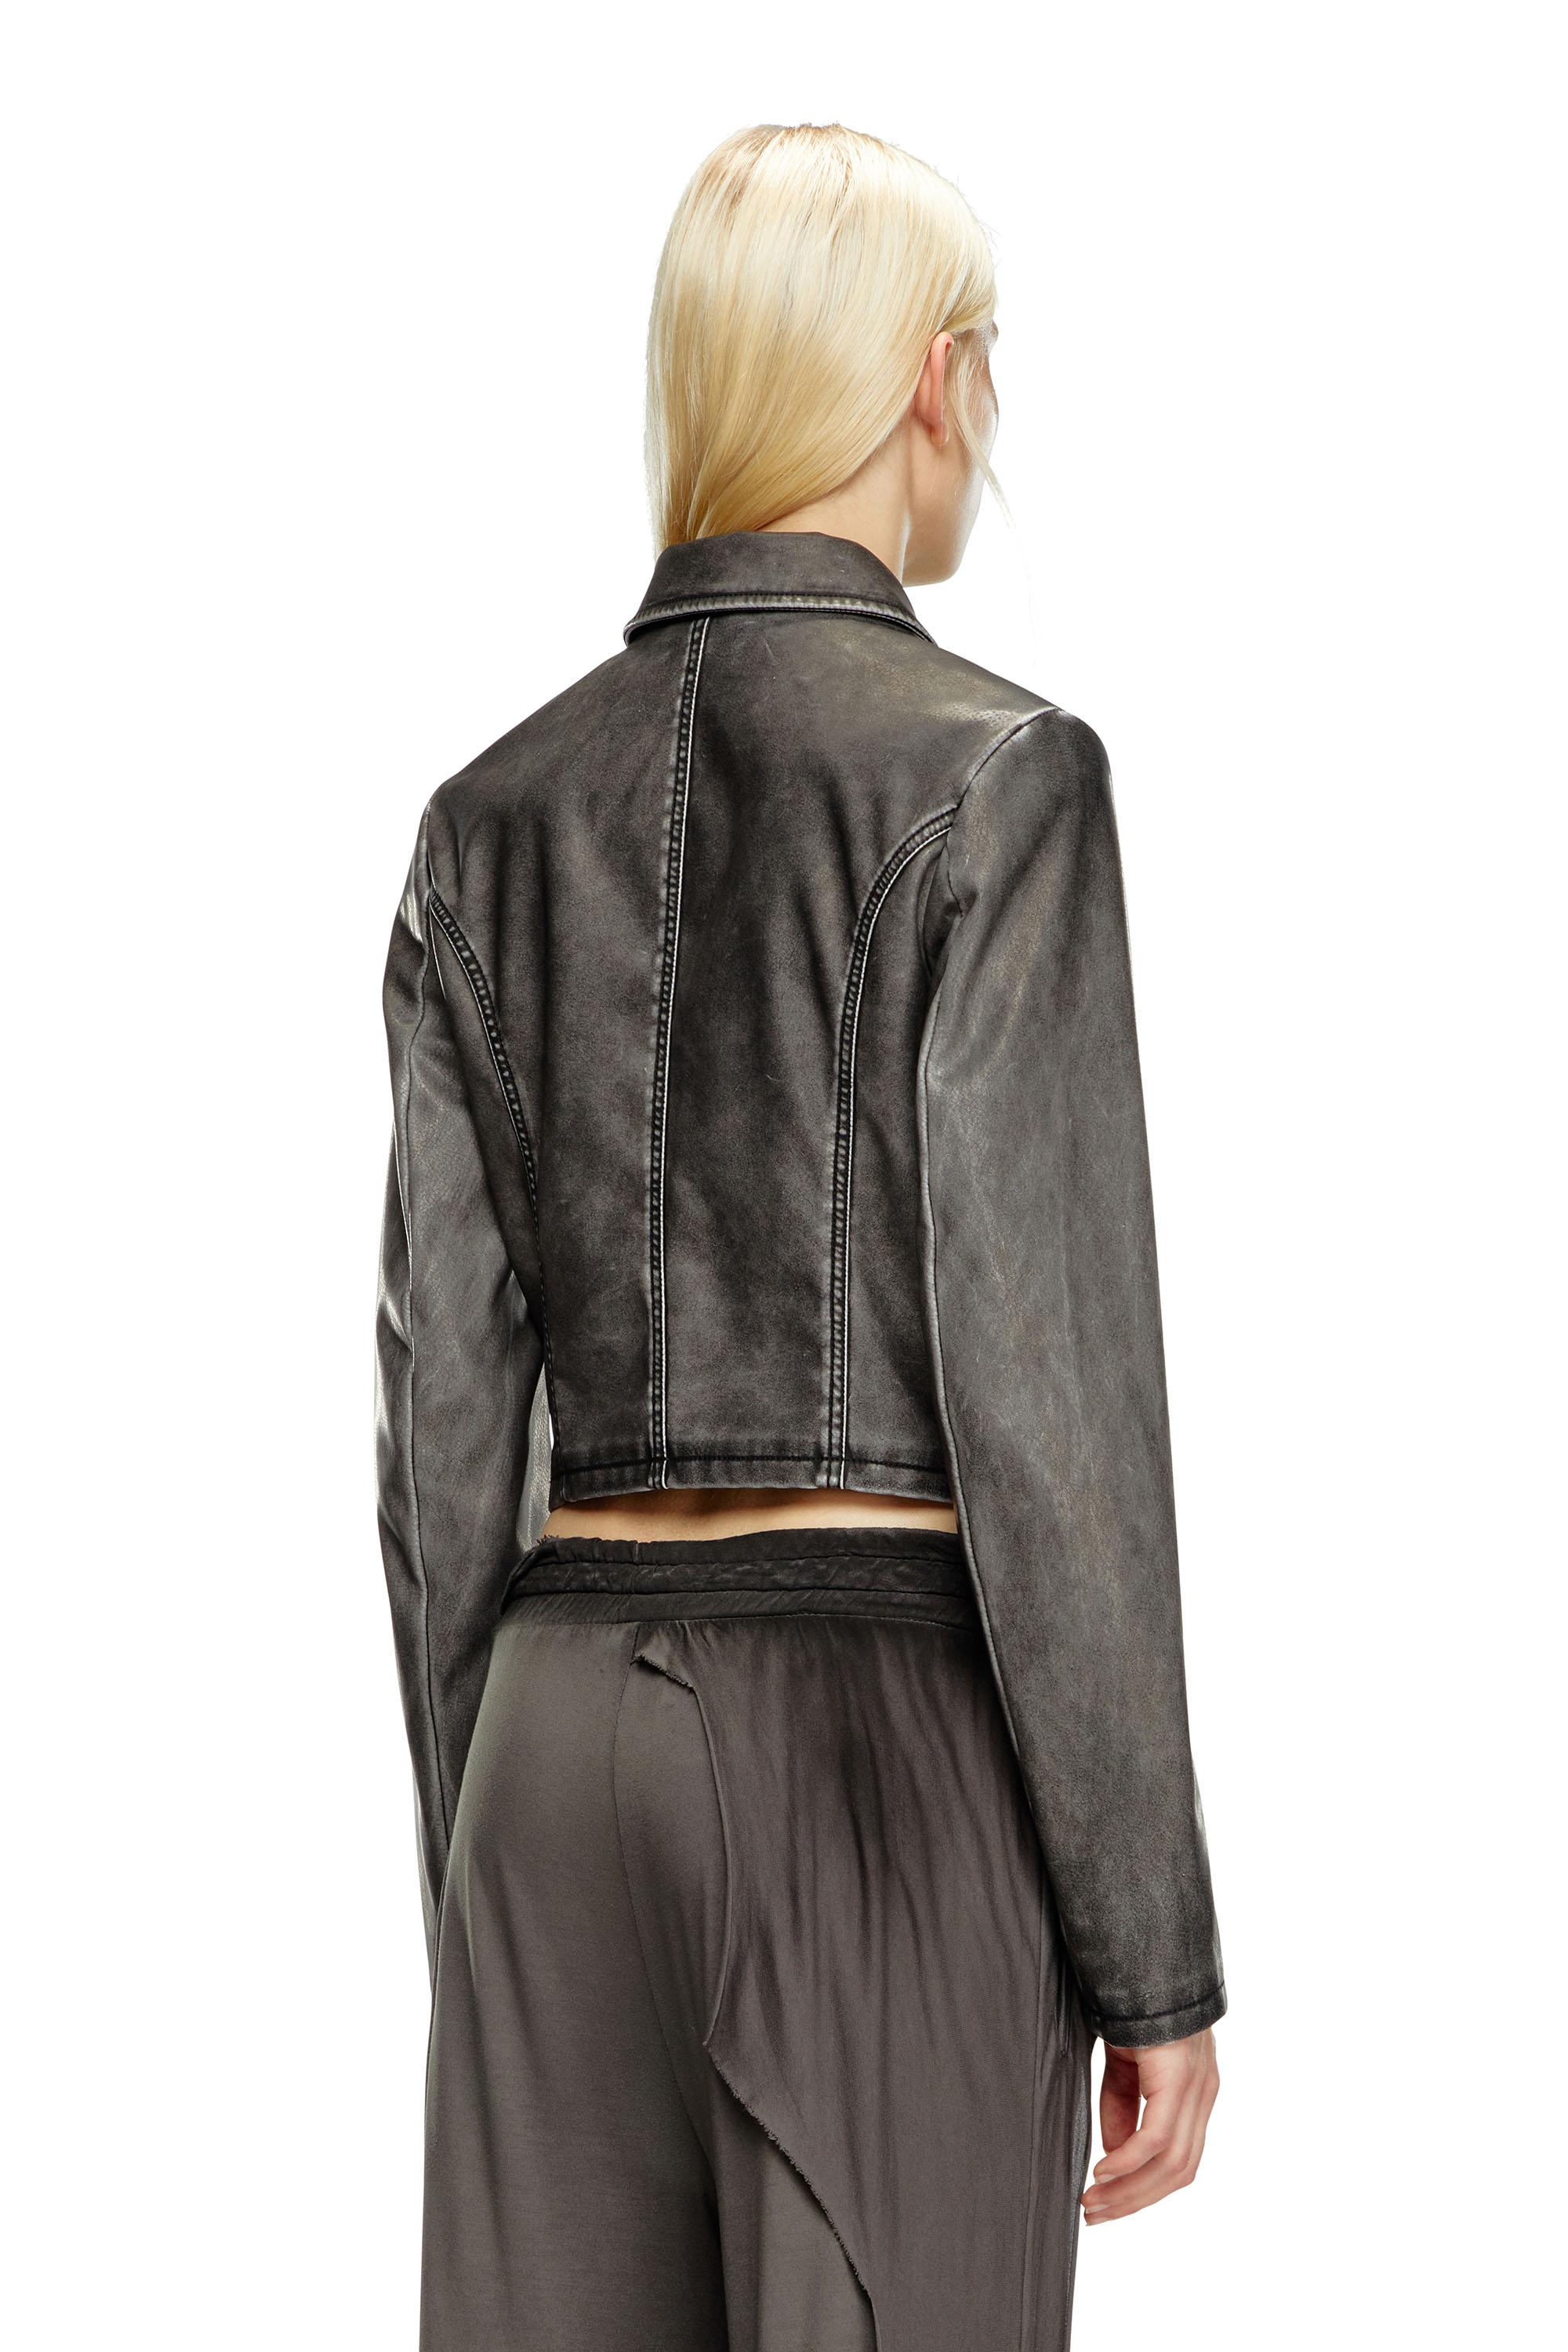 Diesel - G-OTA, Female Cropped jacket in washed tech fabric in ブラック - Image 4